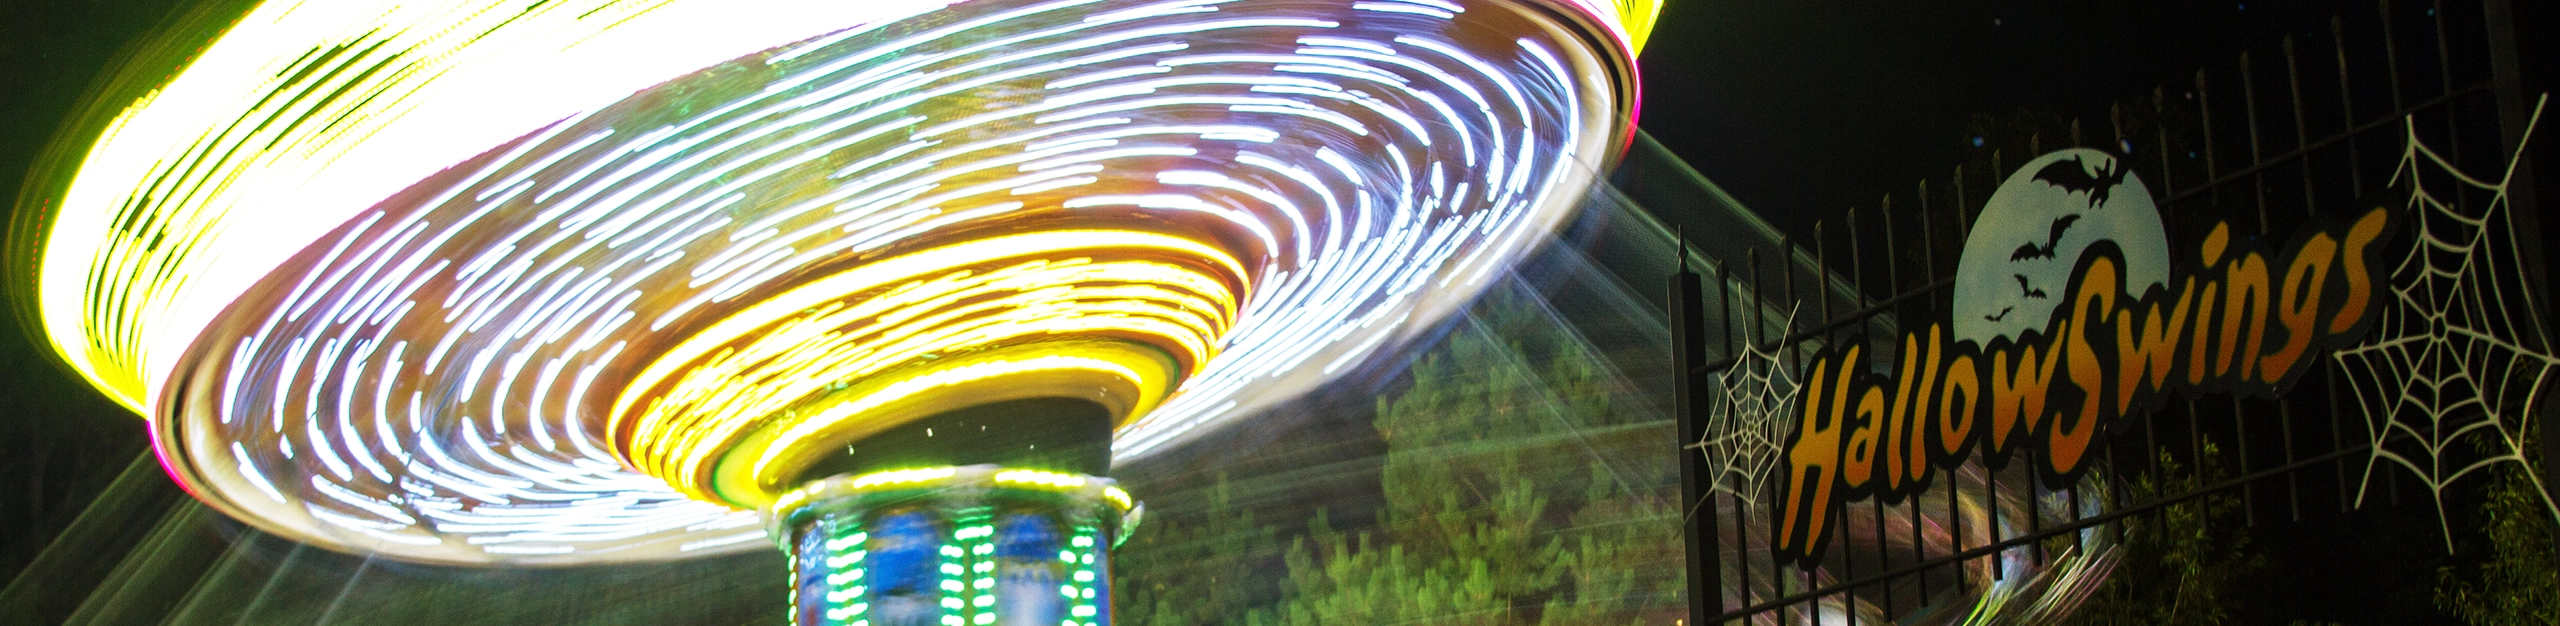 Night time long exposure showing light trails of HallowSwing's lighting package at Holiday World & Splashin' Safari in Santa Claus, Indiana.